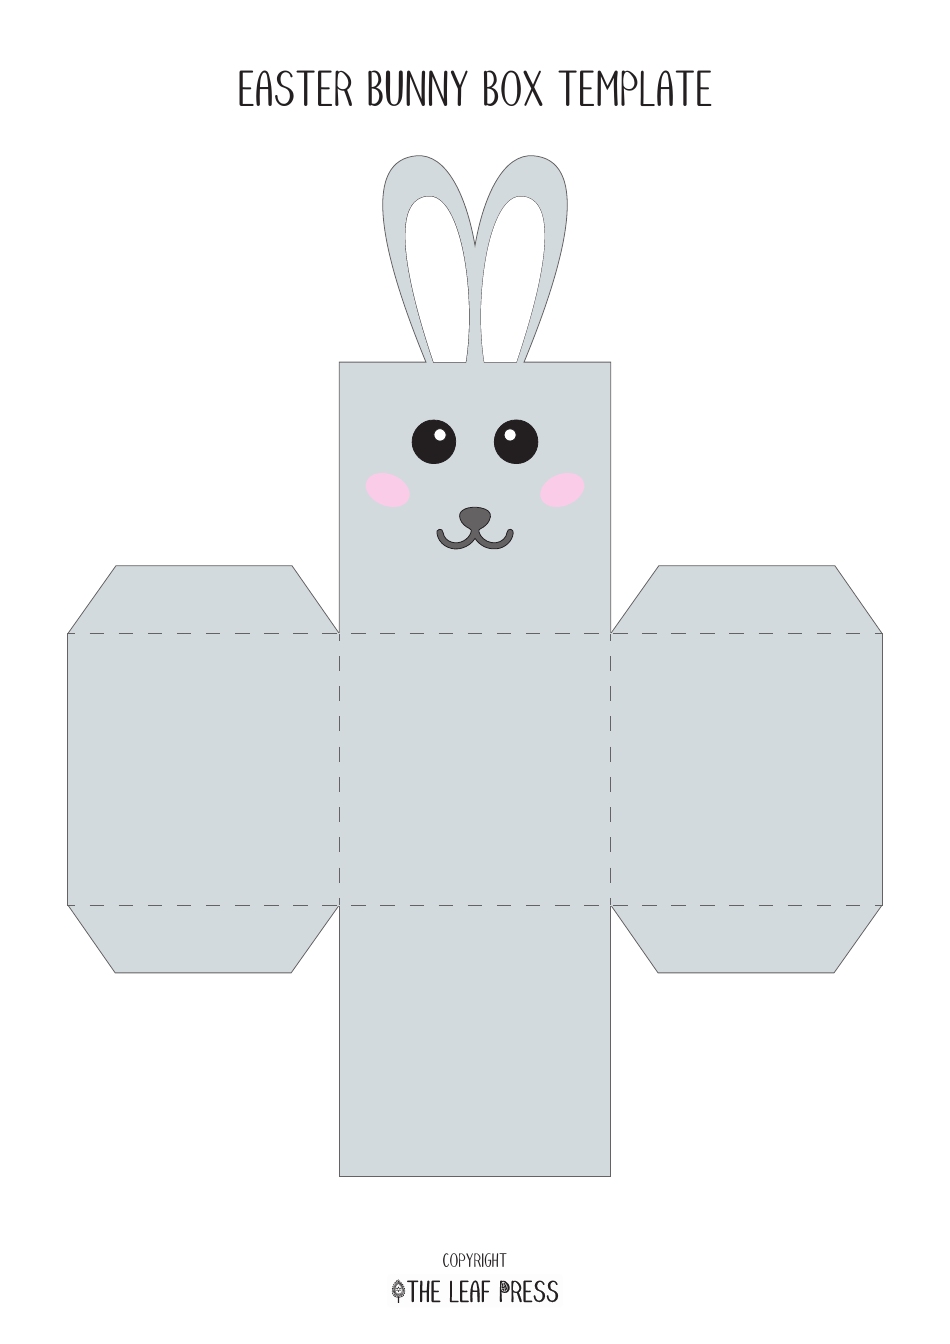 Easter Bunny Box Template - Grey, Page 1